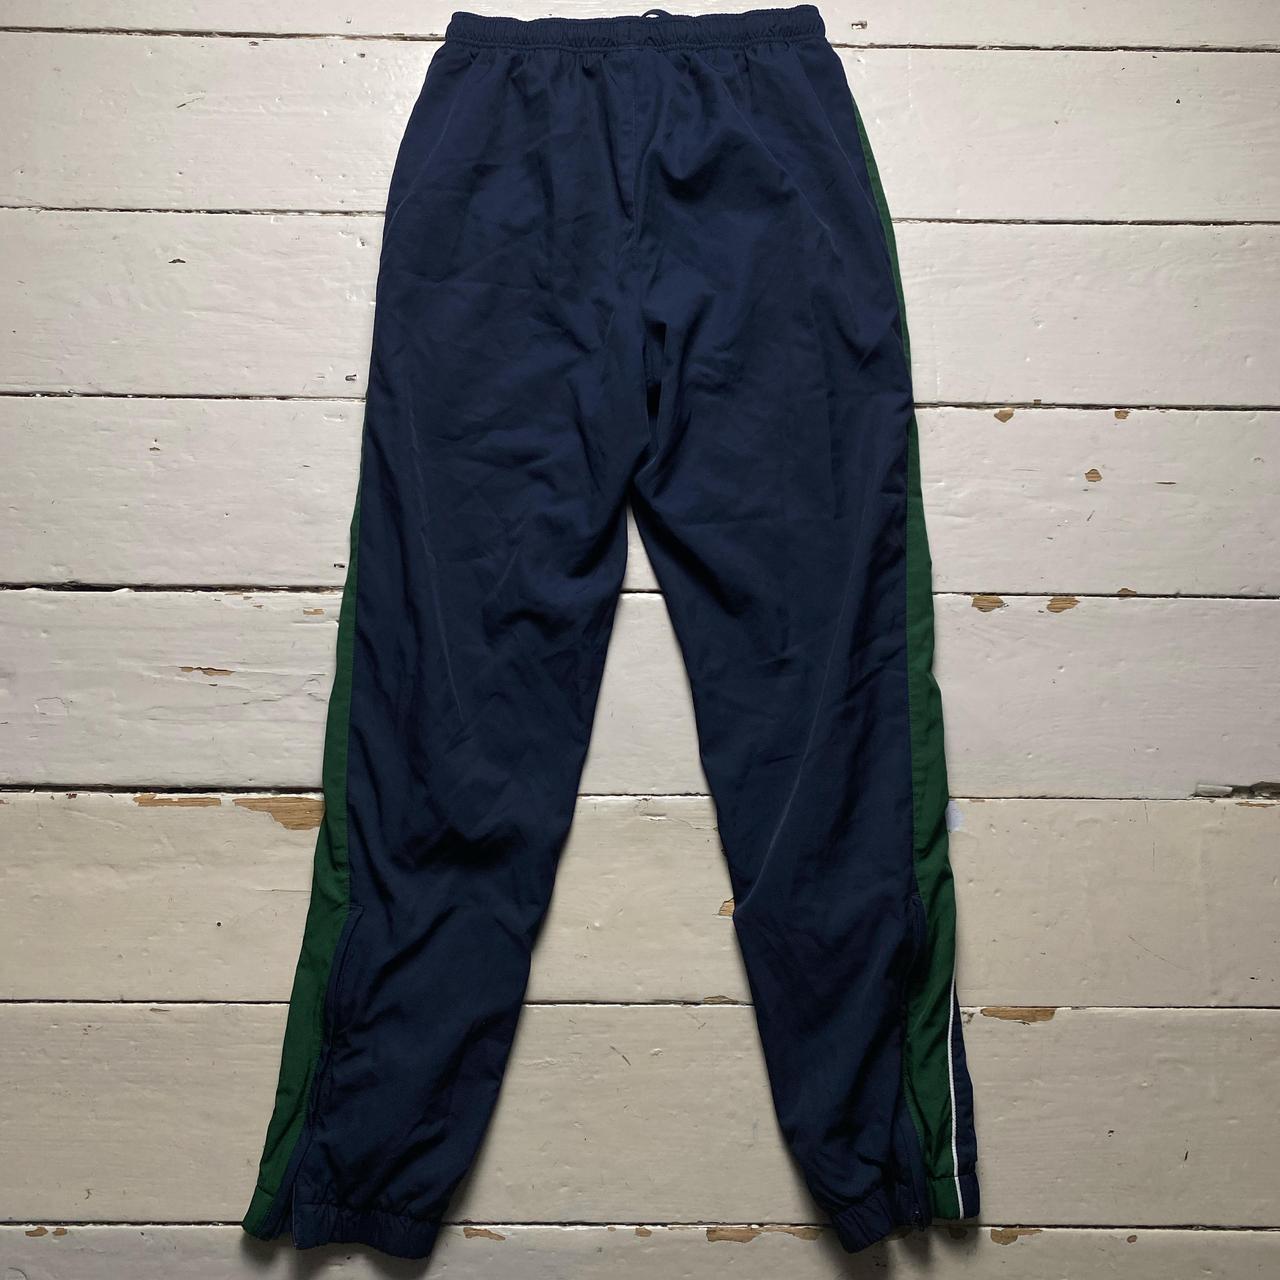 Lacoste Navy Green and White Trackpant Shell Bottoms